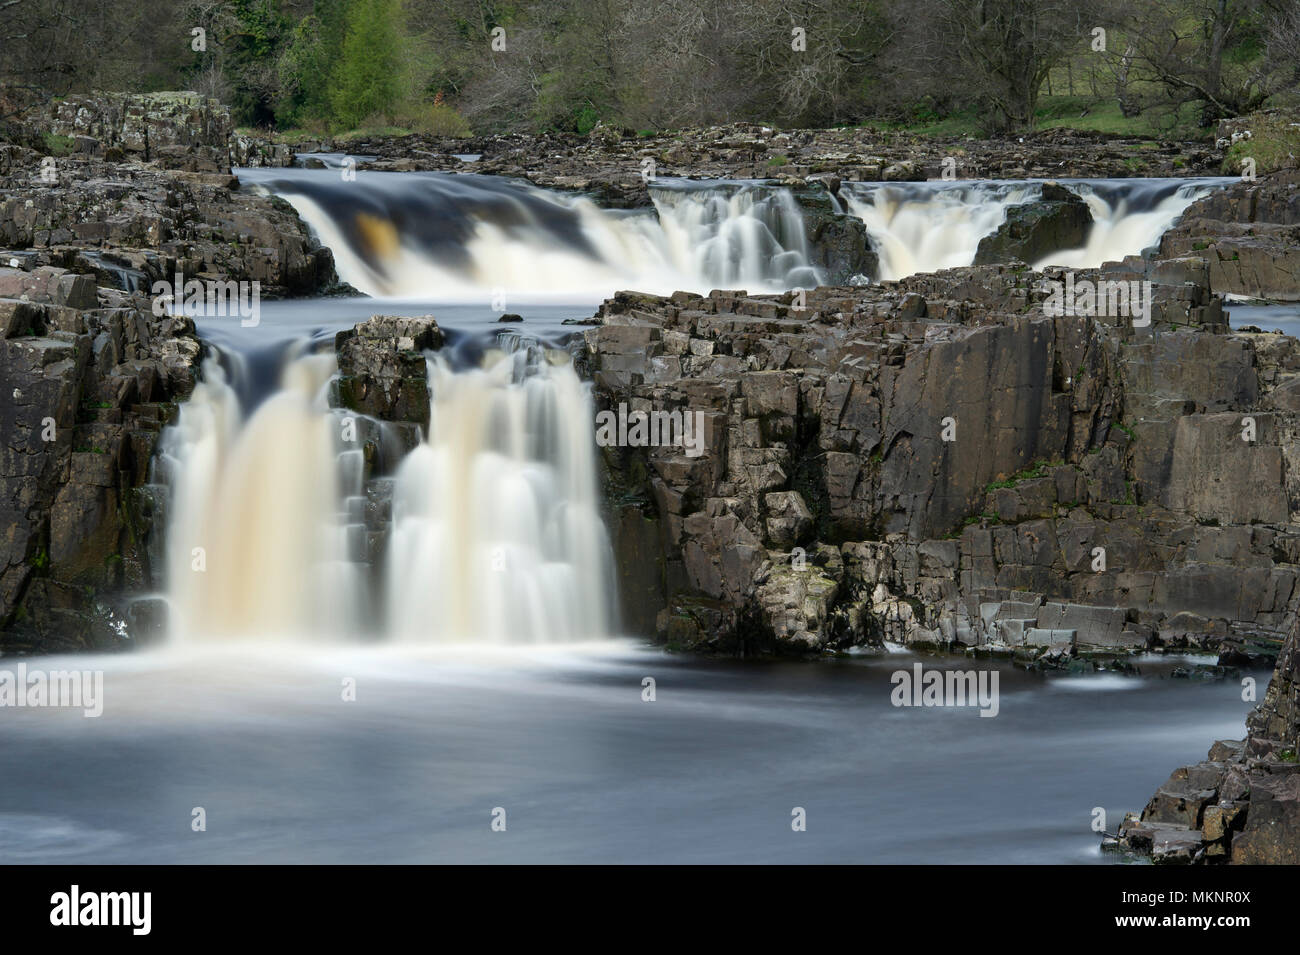 Cascate di Low Force a Teesdale, North Pennines AONB (Area of Outstanding Natural Beauty) vicino al Bowlees Visitor Center. Foto Stock